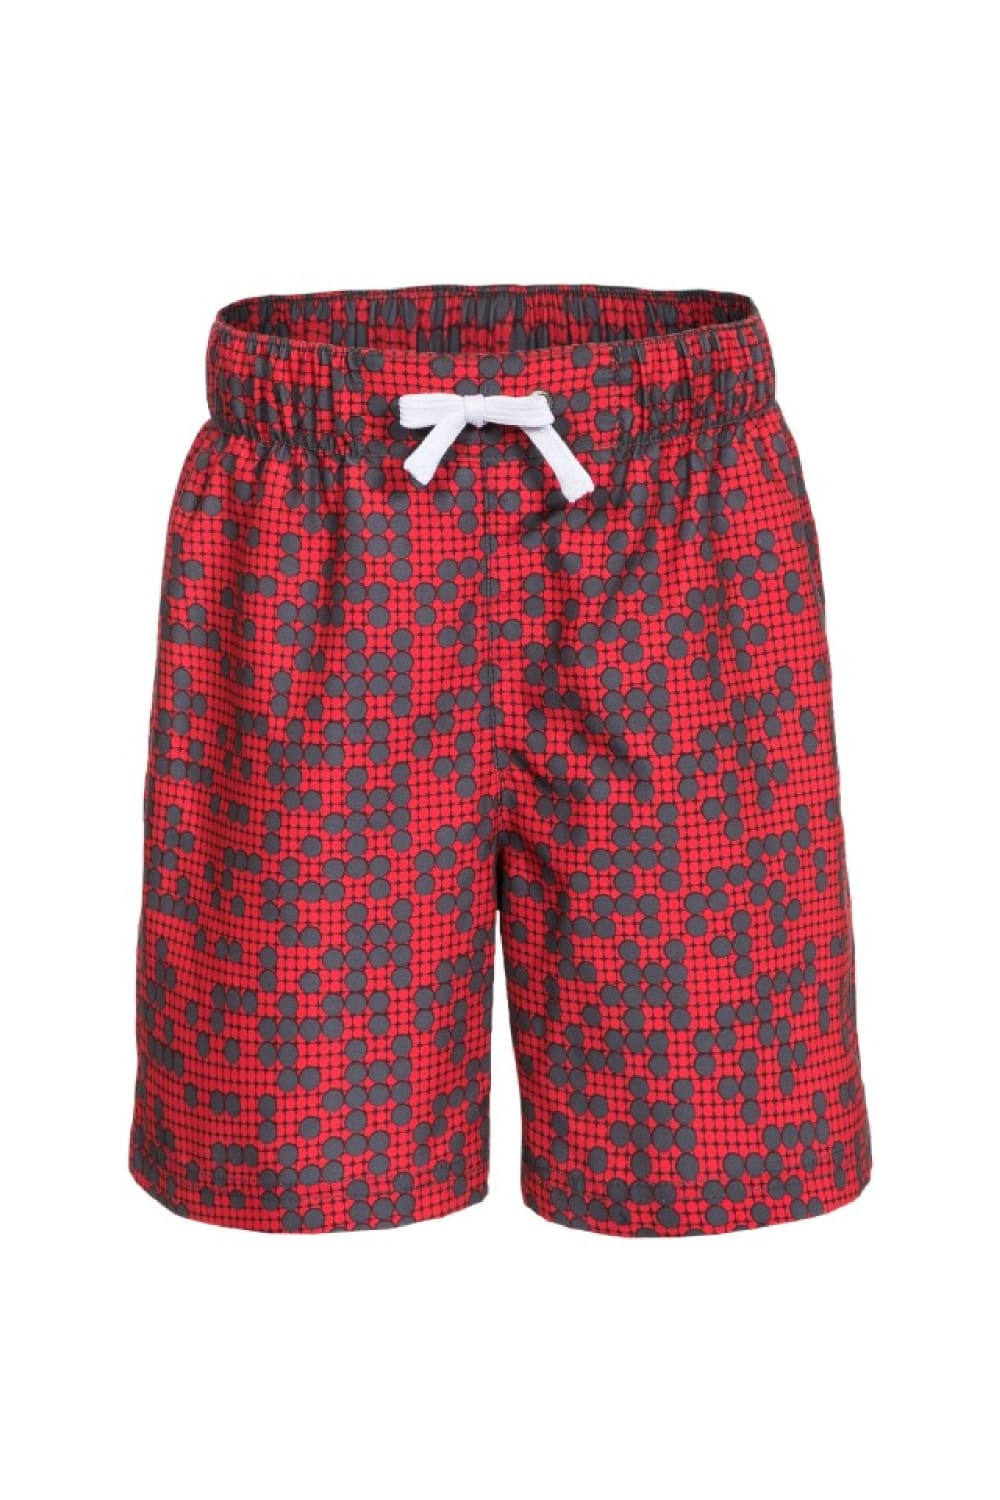 Childrens Boys Alley Swimming Shorts - Red